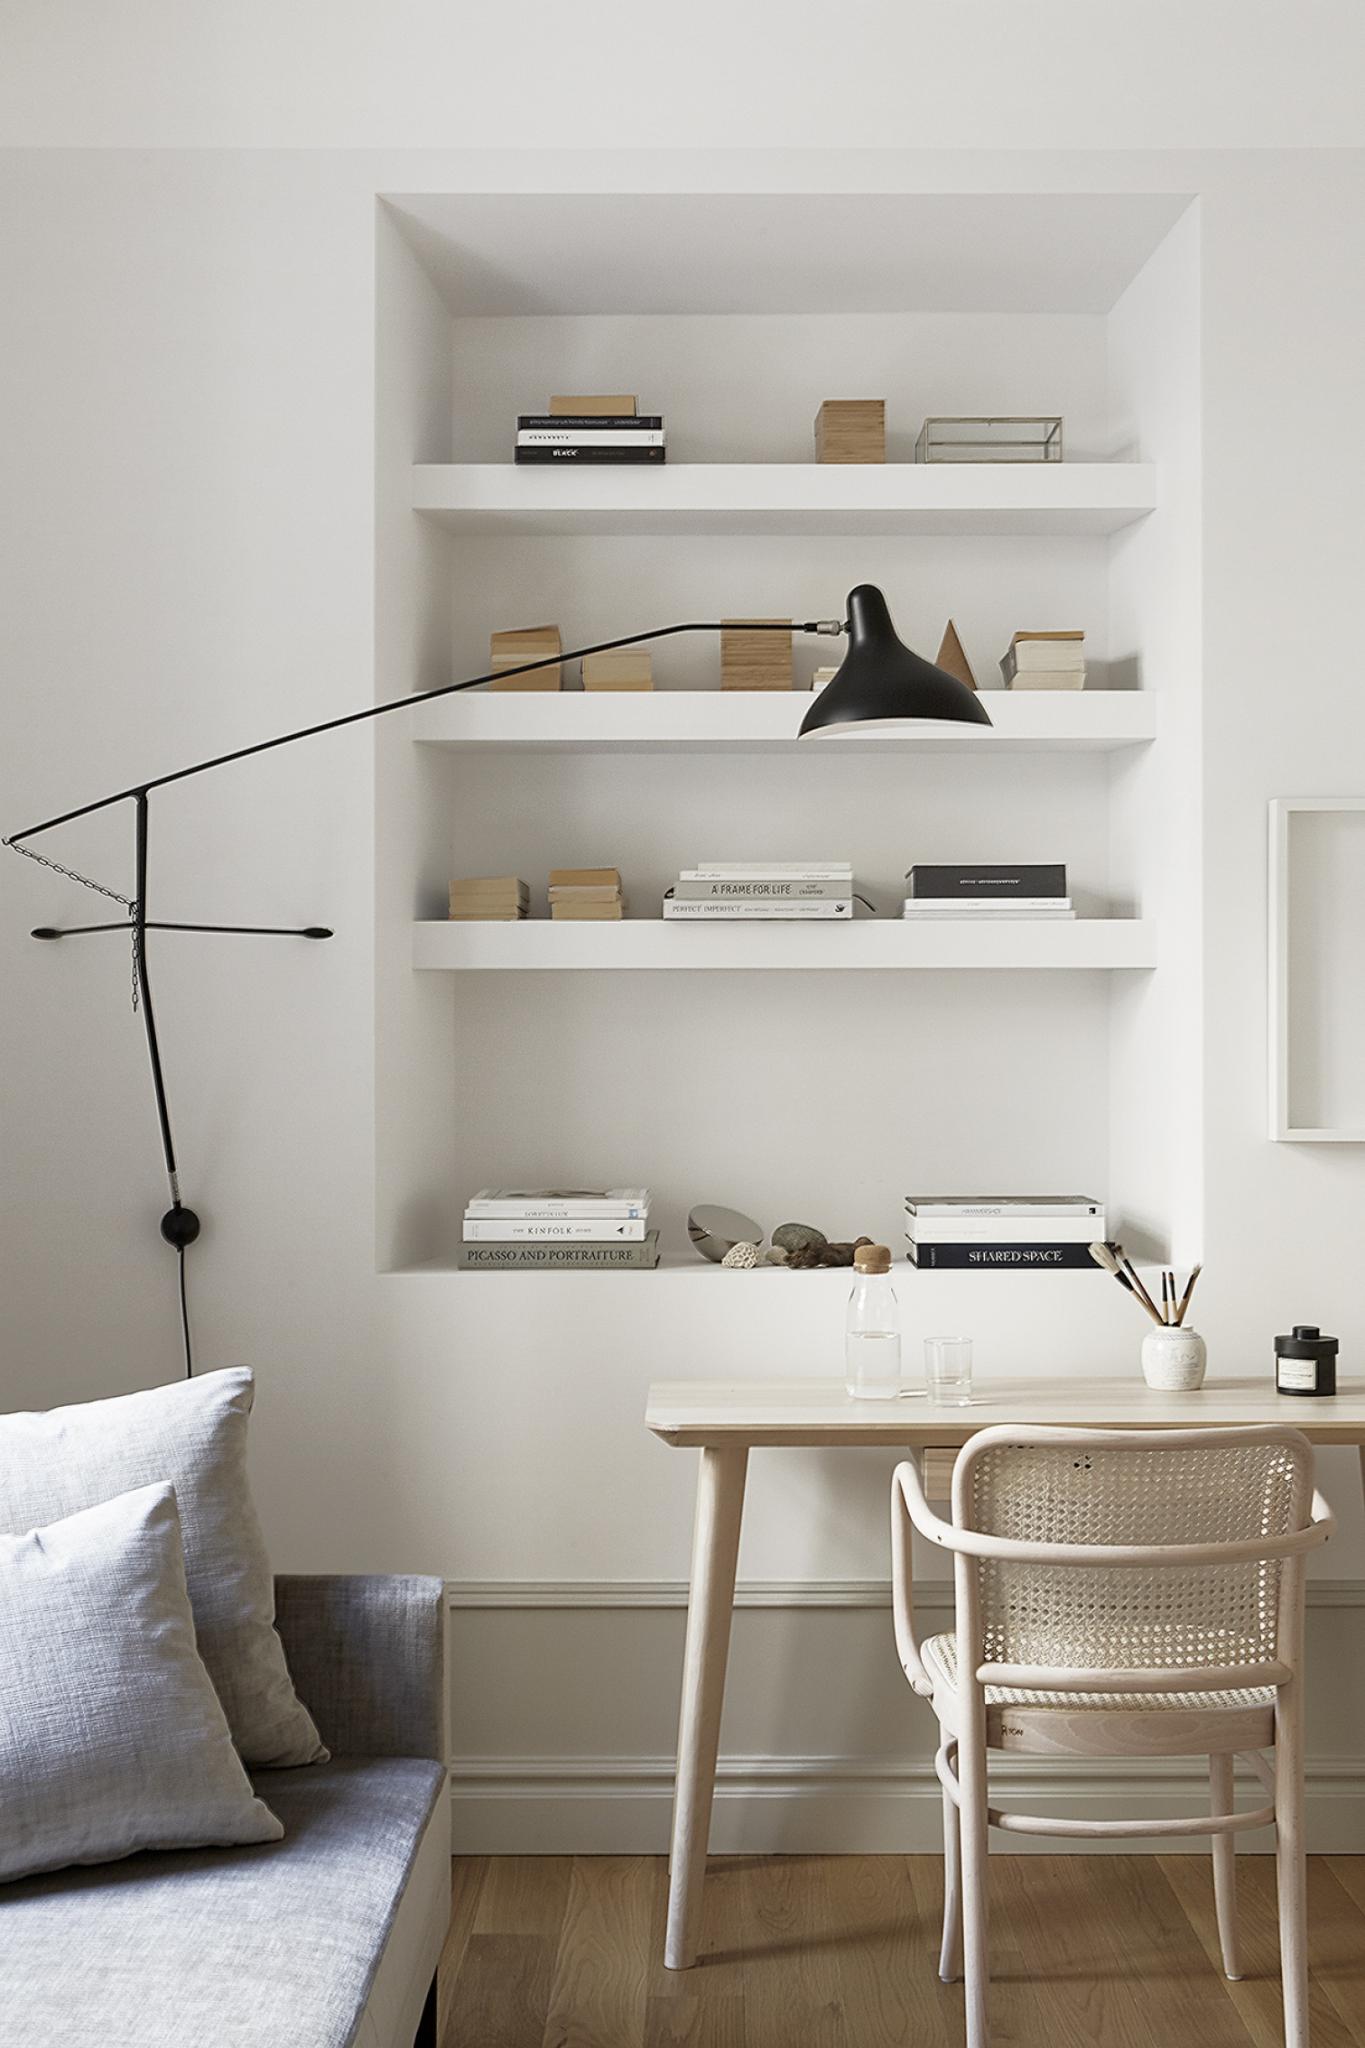 4 fundamentals you should consider when living in a small apartment